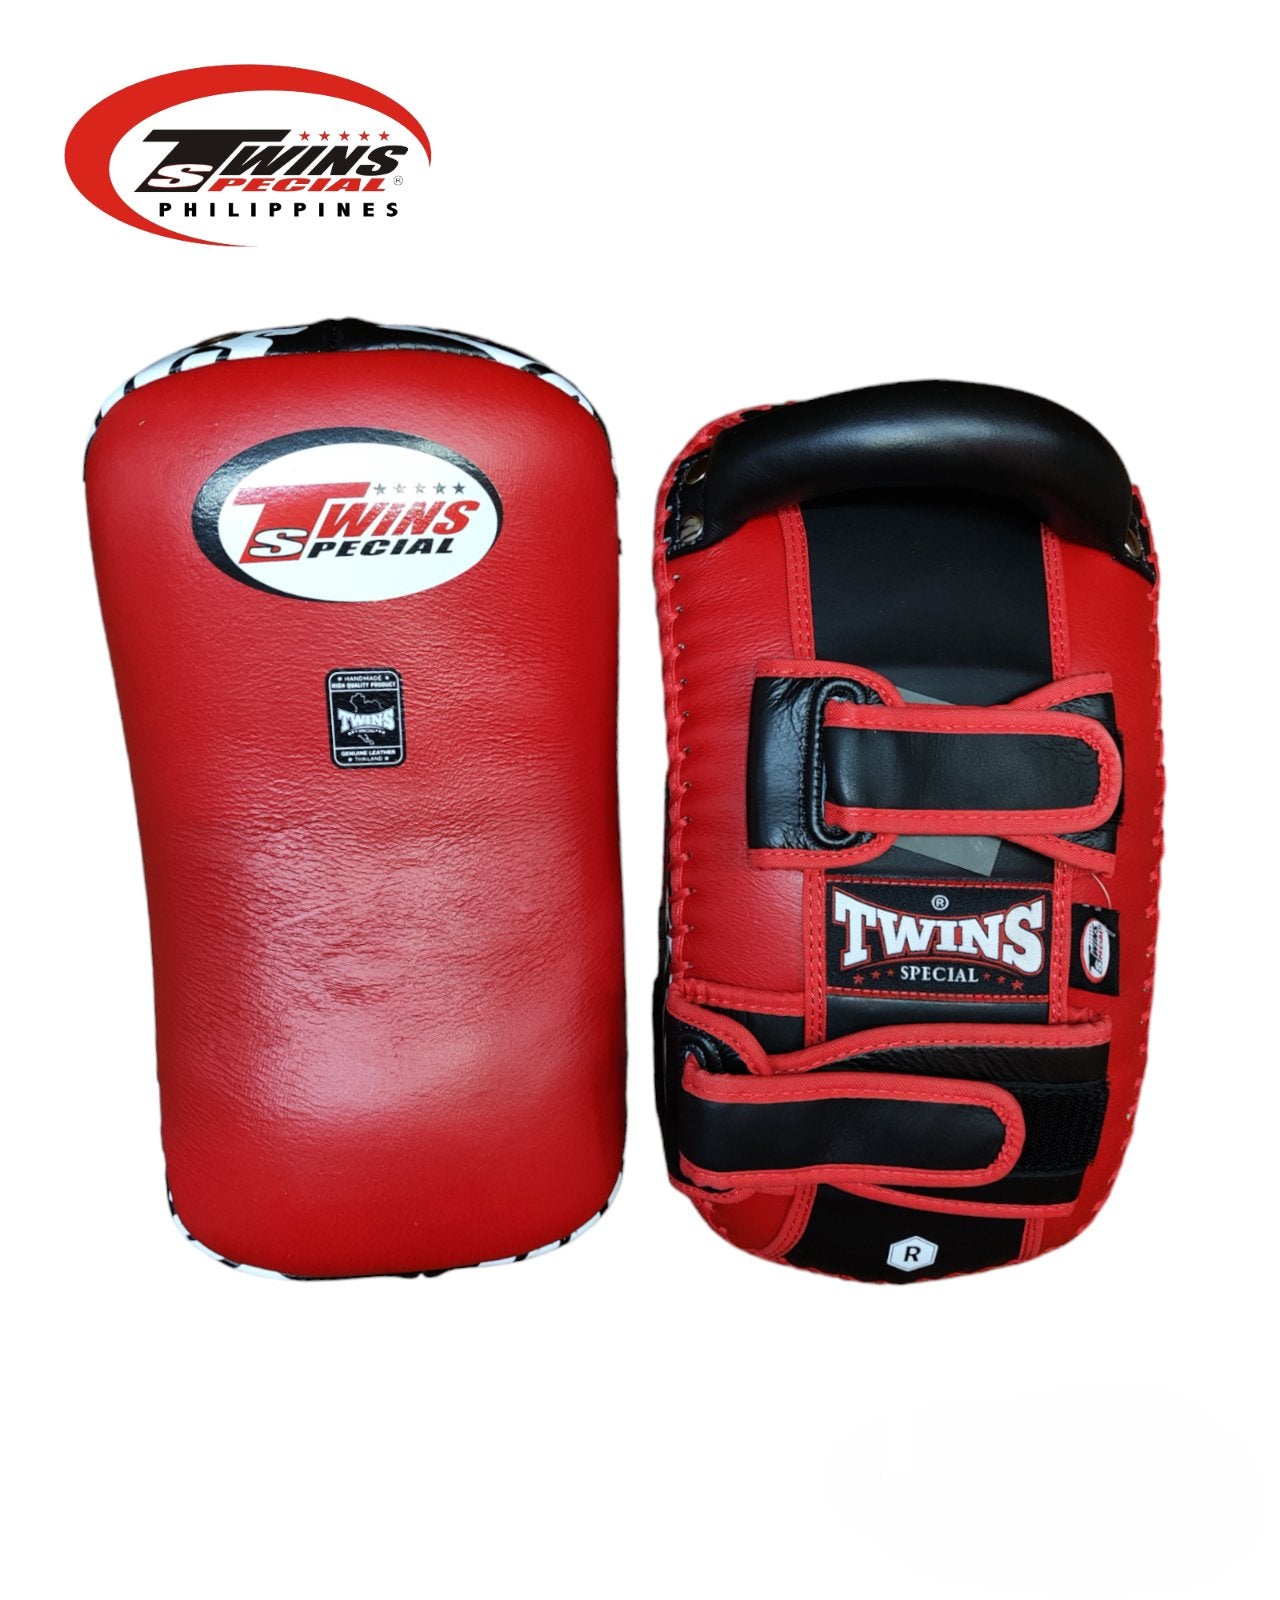 Twins Special Curved Thai Pads: KPL-10 Genuine Leather